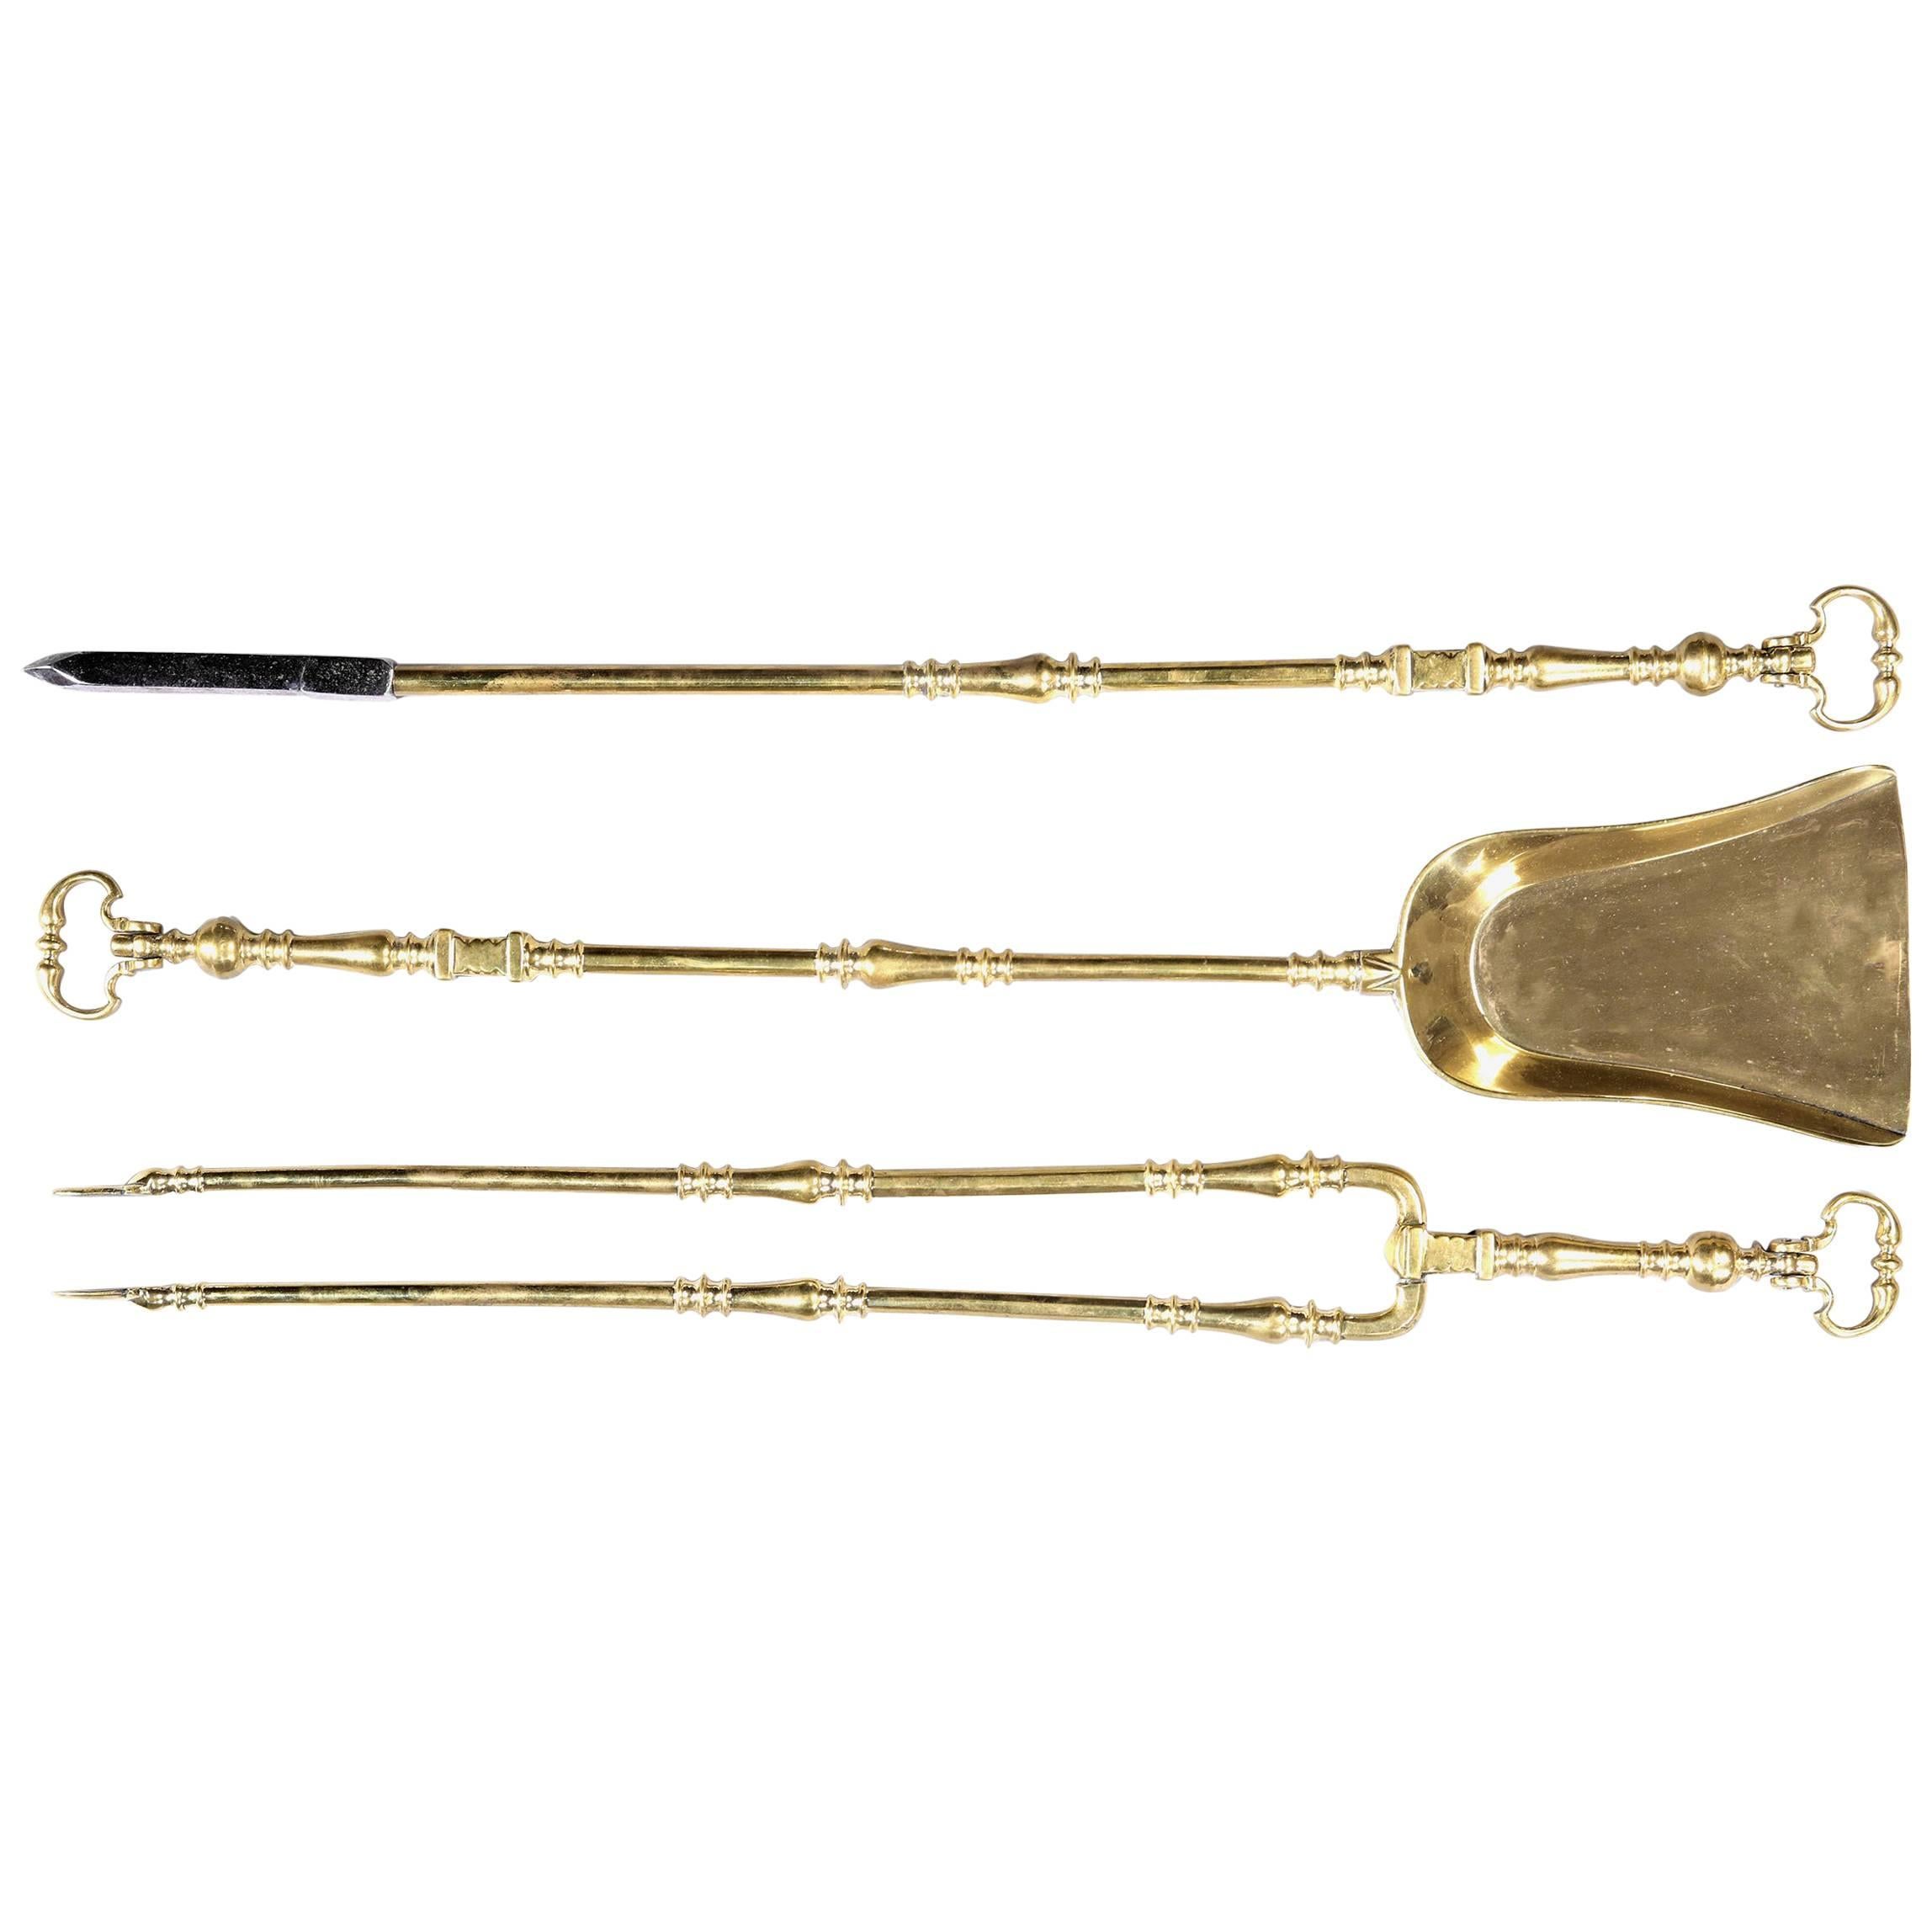 A Set of Large Brass Fire Tools or Fire Irons